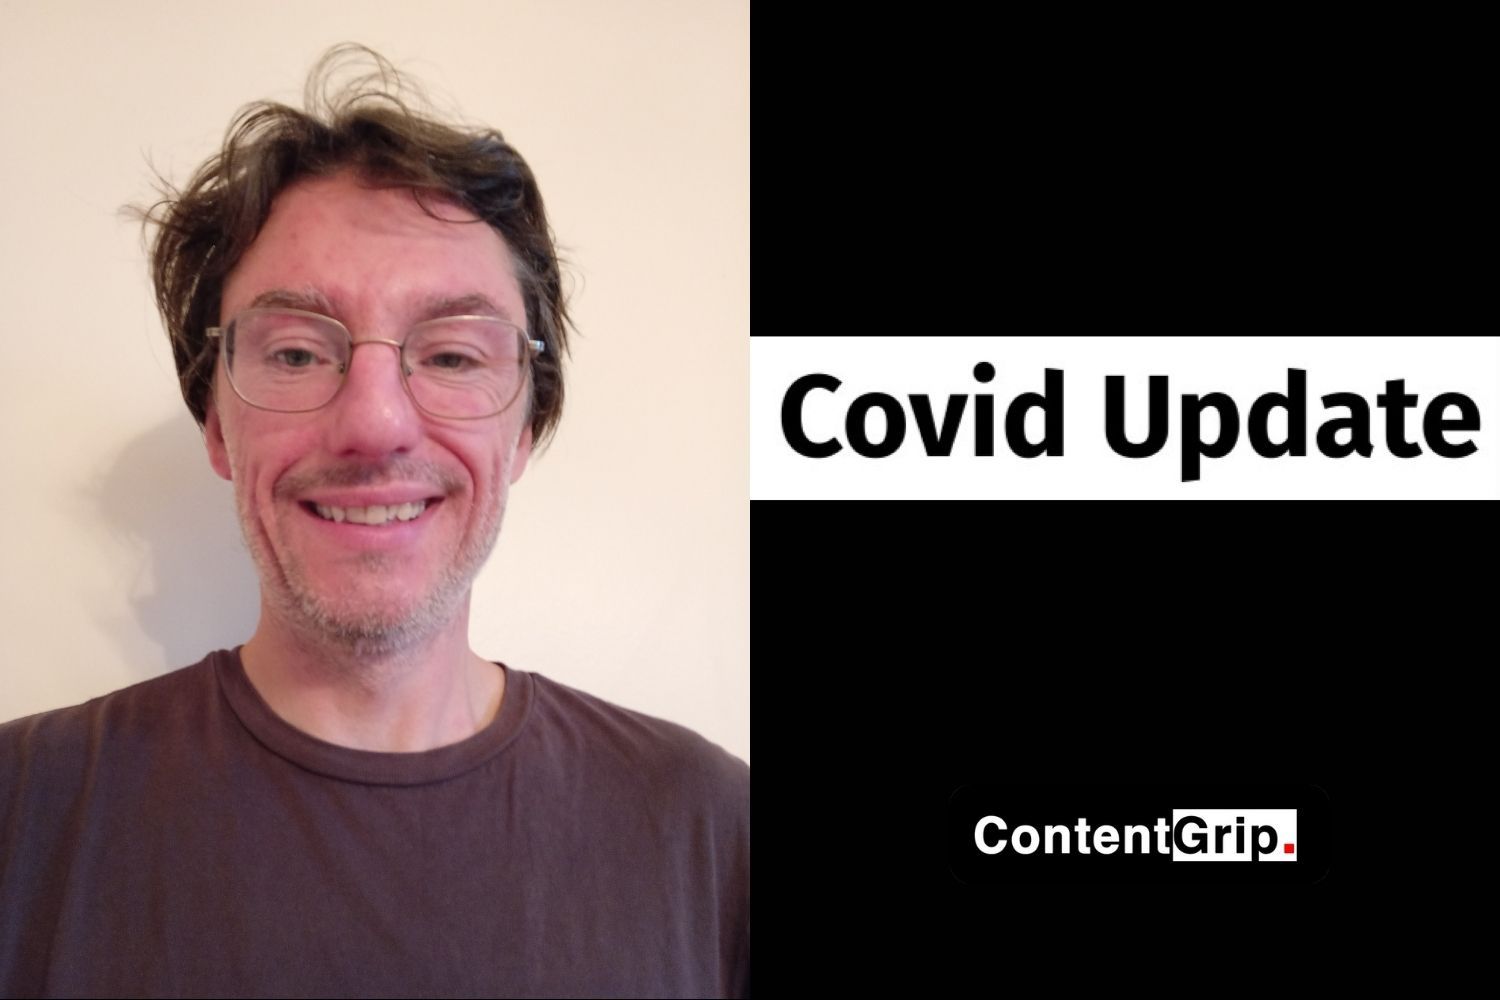 Canadian journalist Nathan Munn wants to bring empathy to Covid-19 reporting